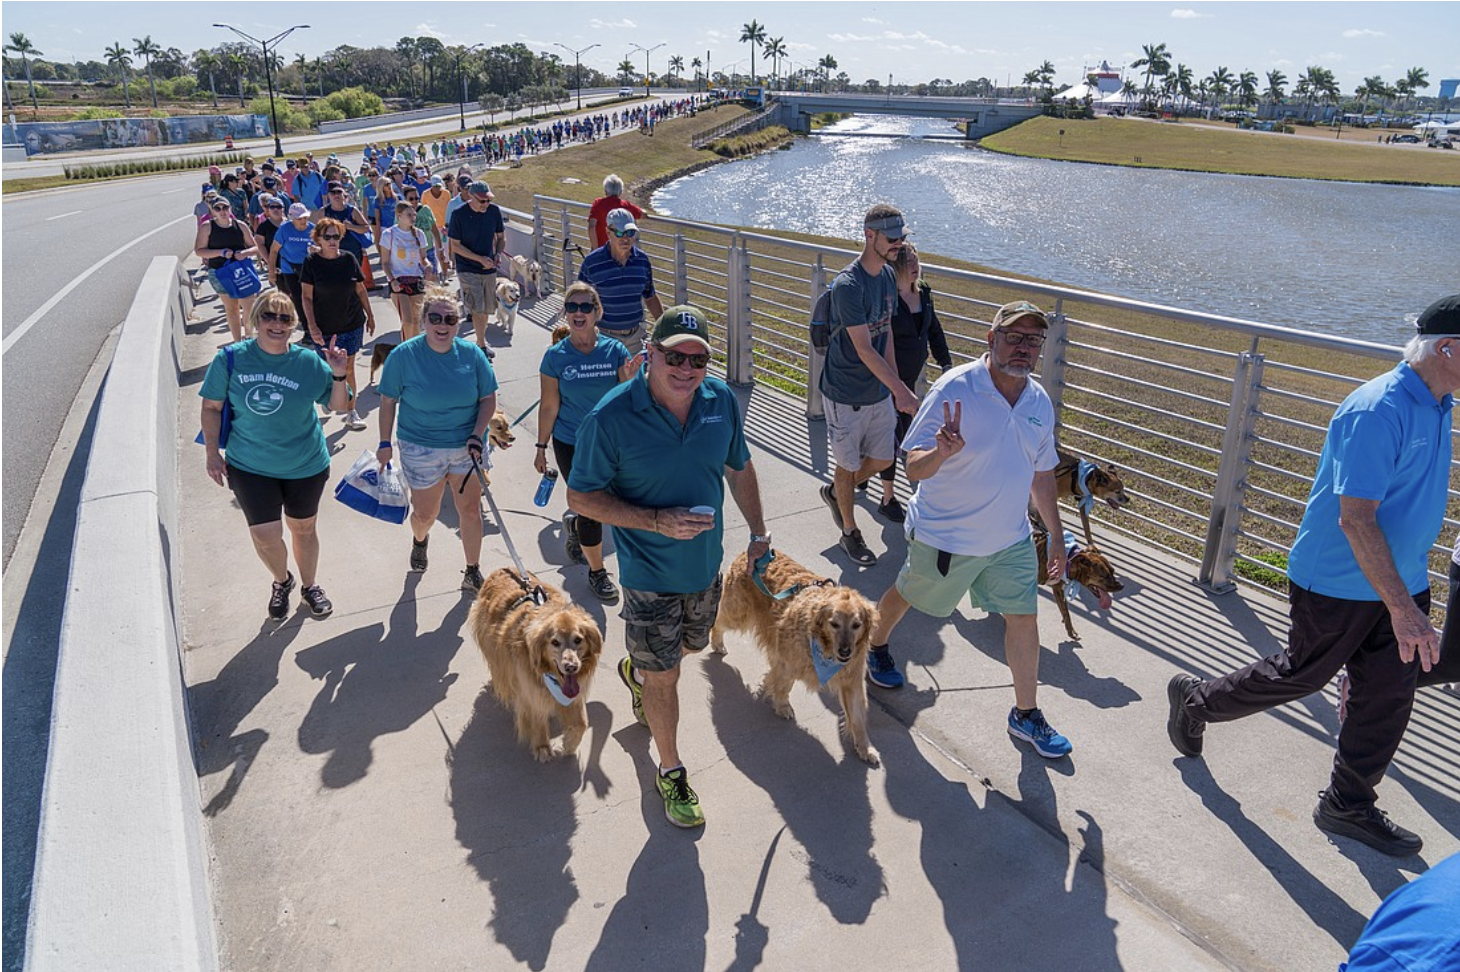 A group of individuals walk with their dogs together and wave to the camera at a fundraiser event.